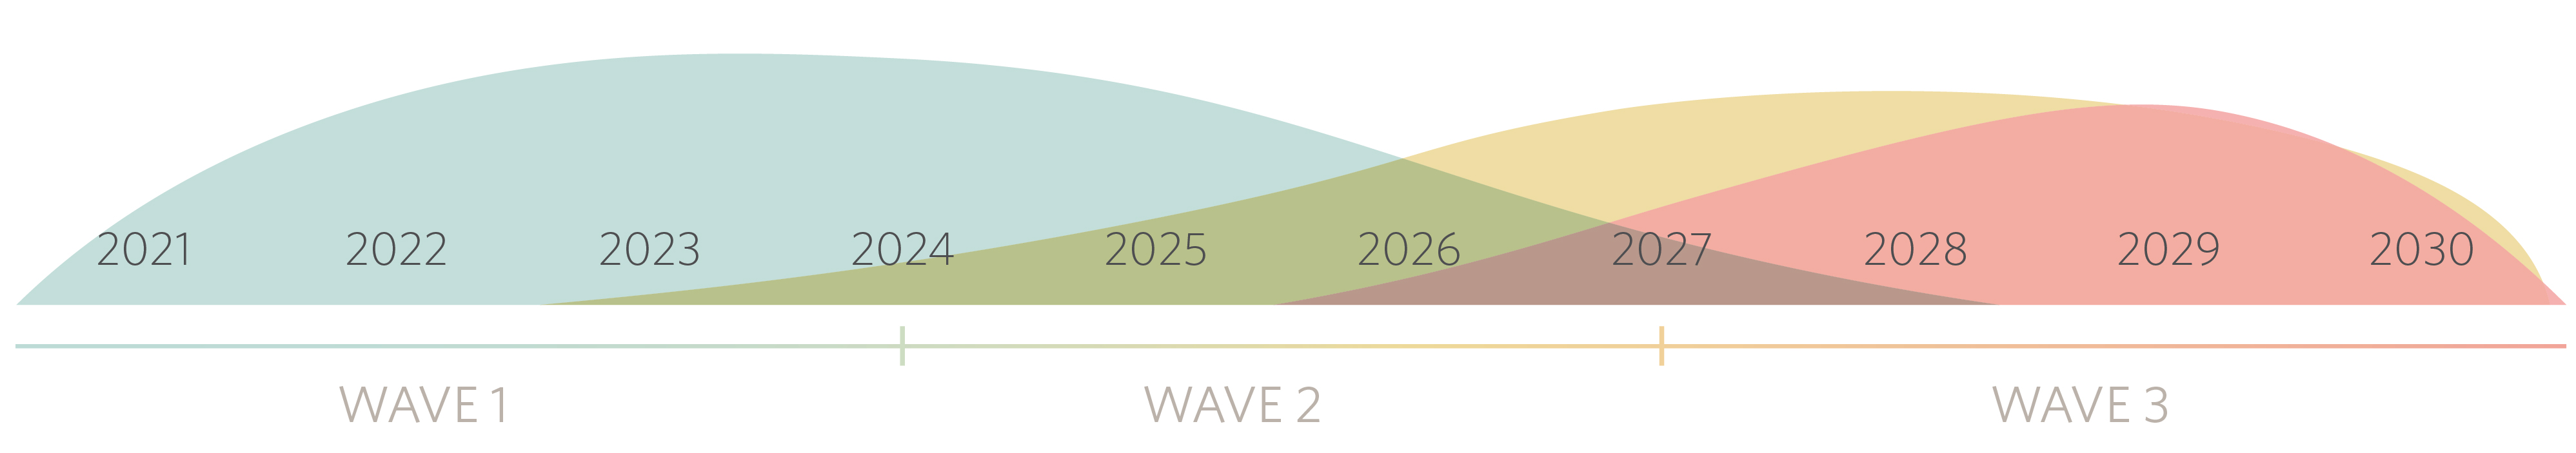 Waves 1 to 3 timeline and current year at 2021